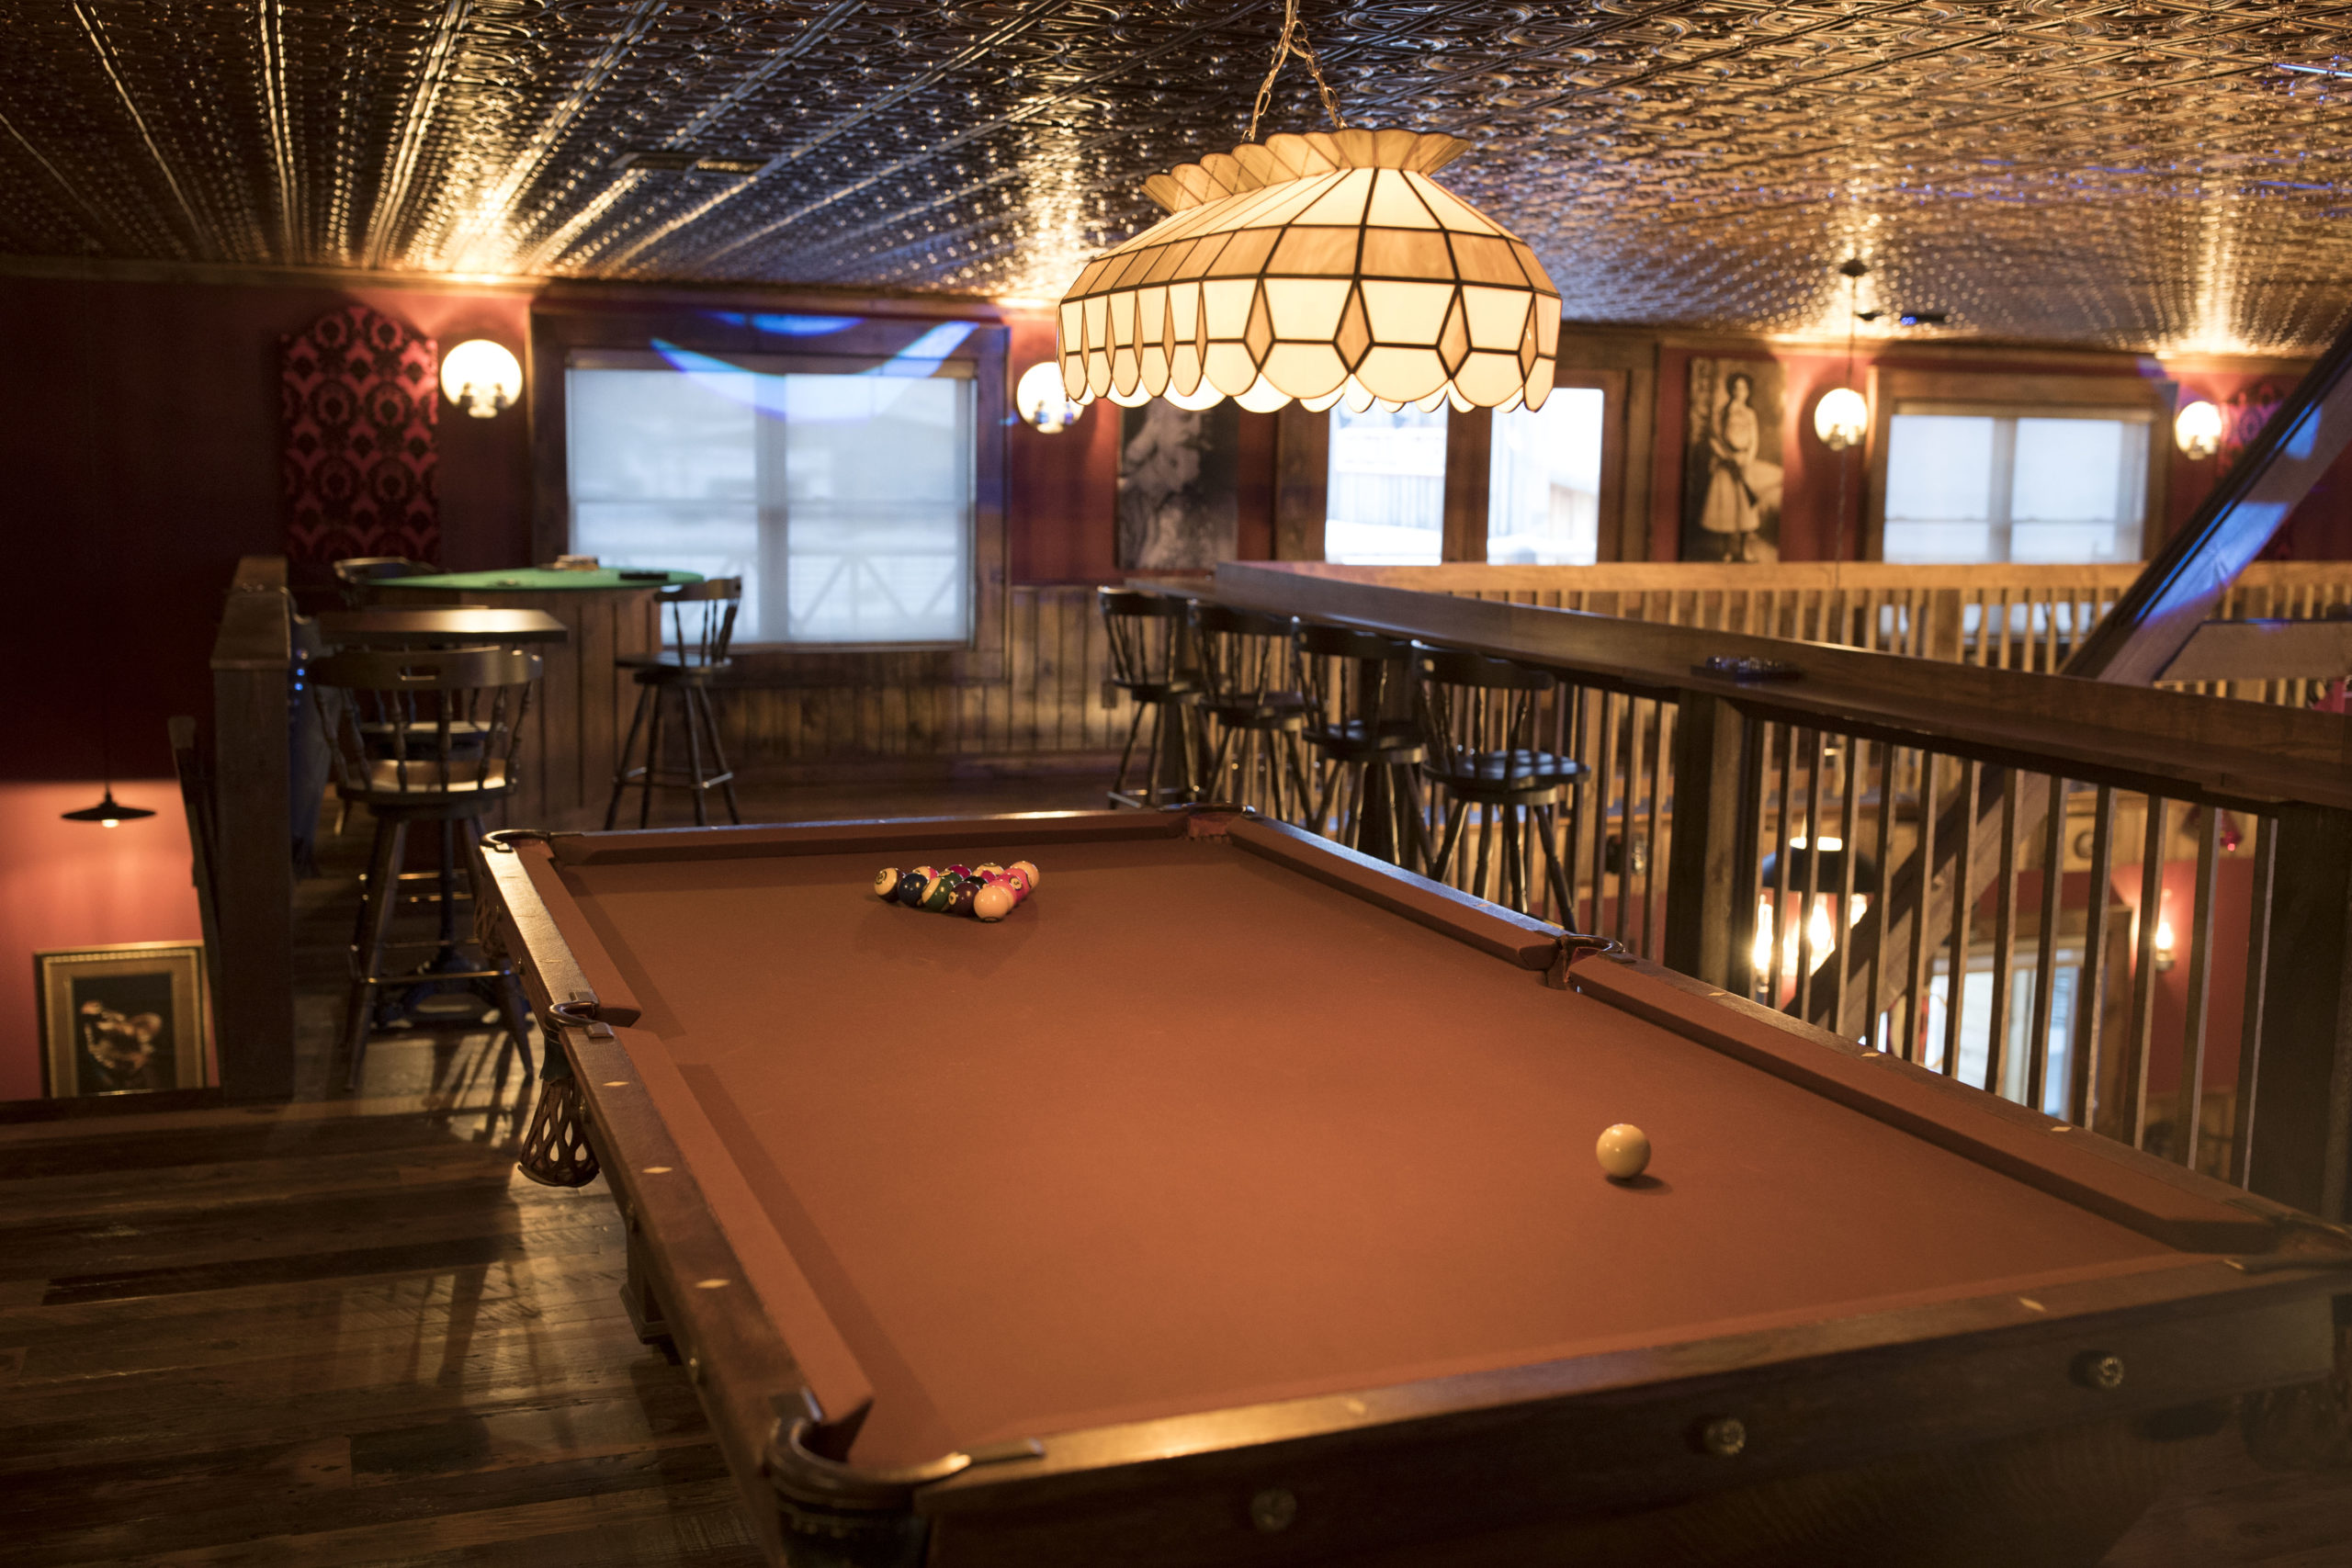 billiards, pool, old west town, bachelor party, bachelor event